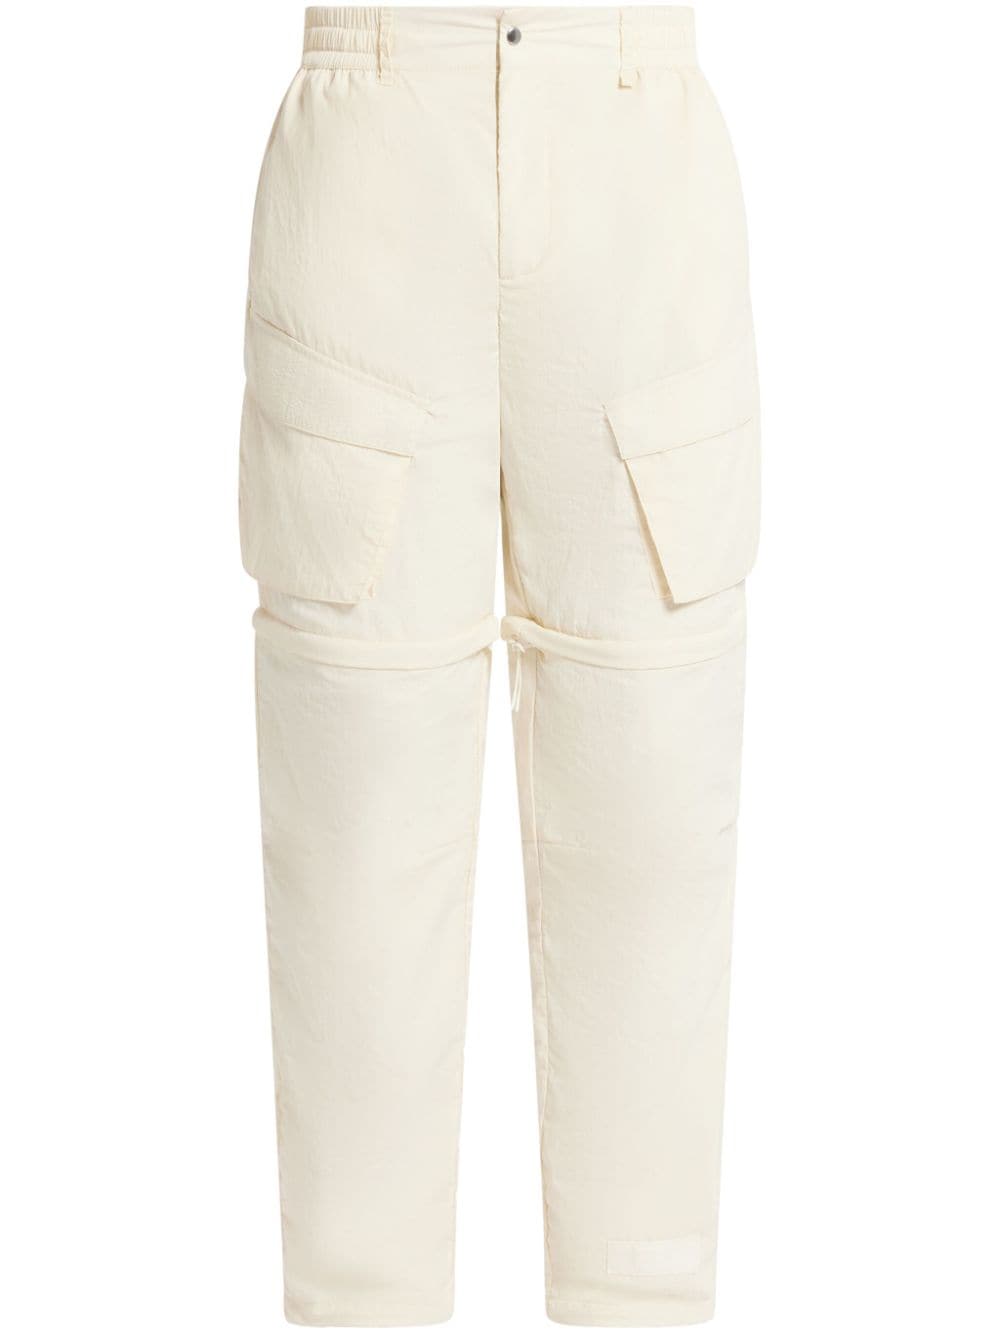 THE GIVING MOVEMENT mid-rise cargo trousers - White von THE GIVING MOVEMENT